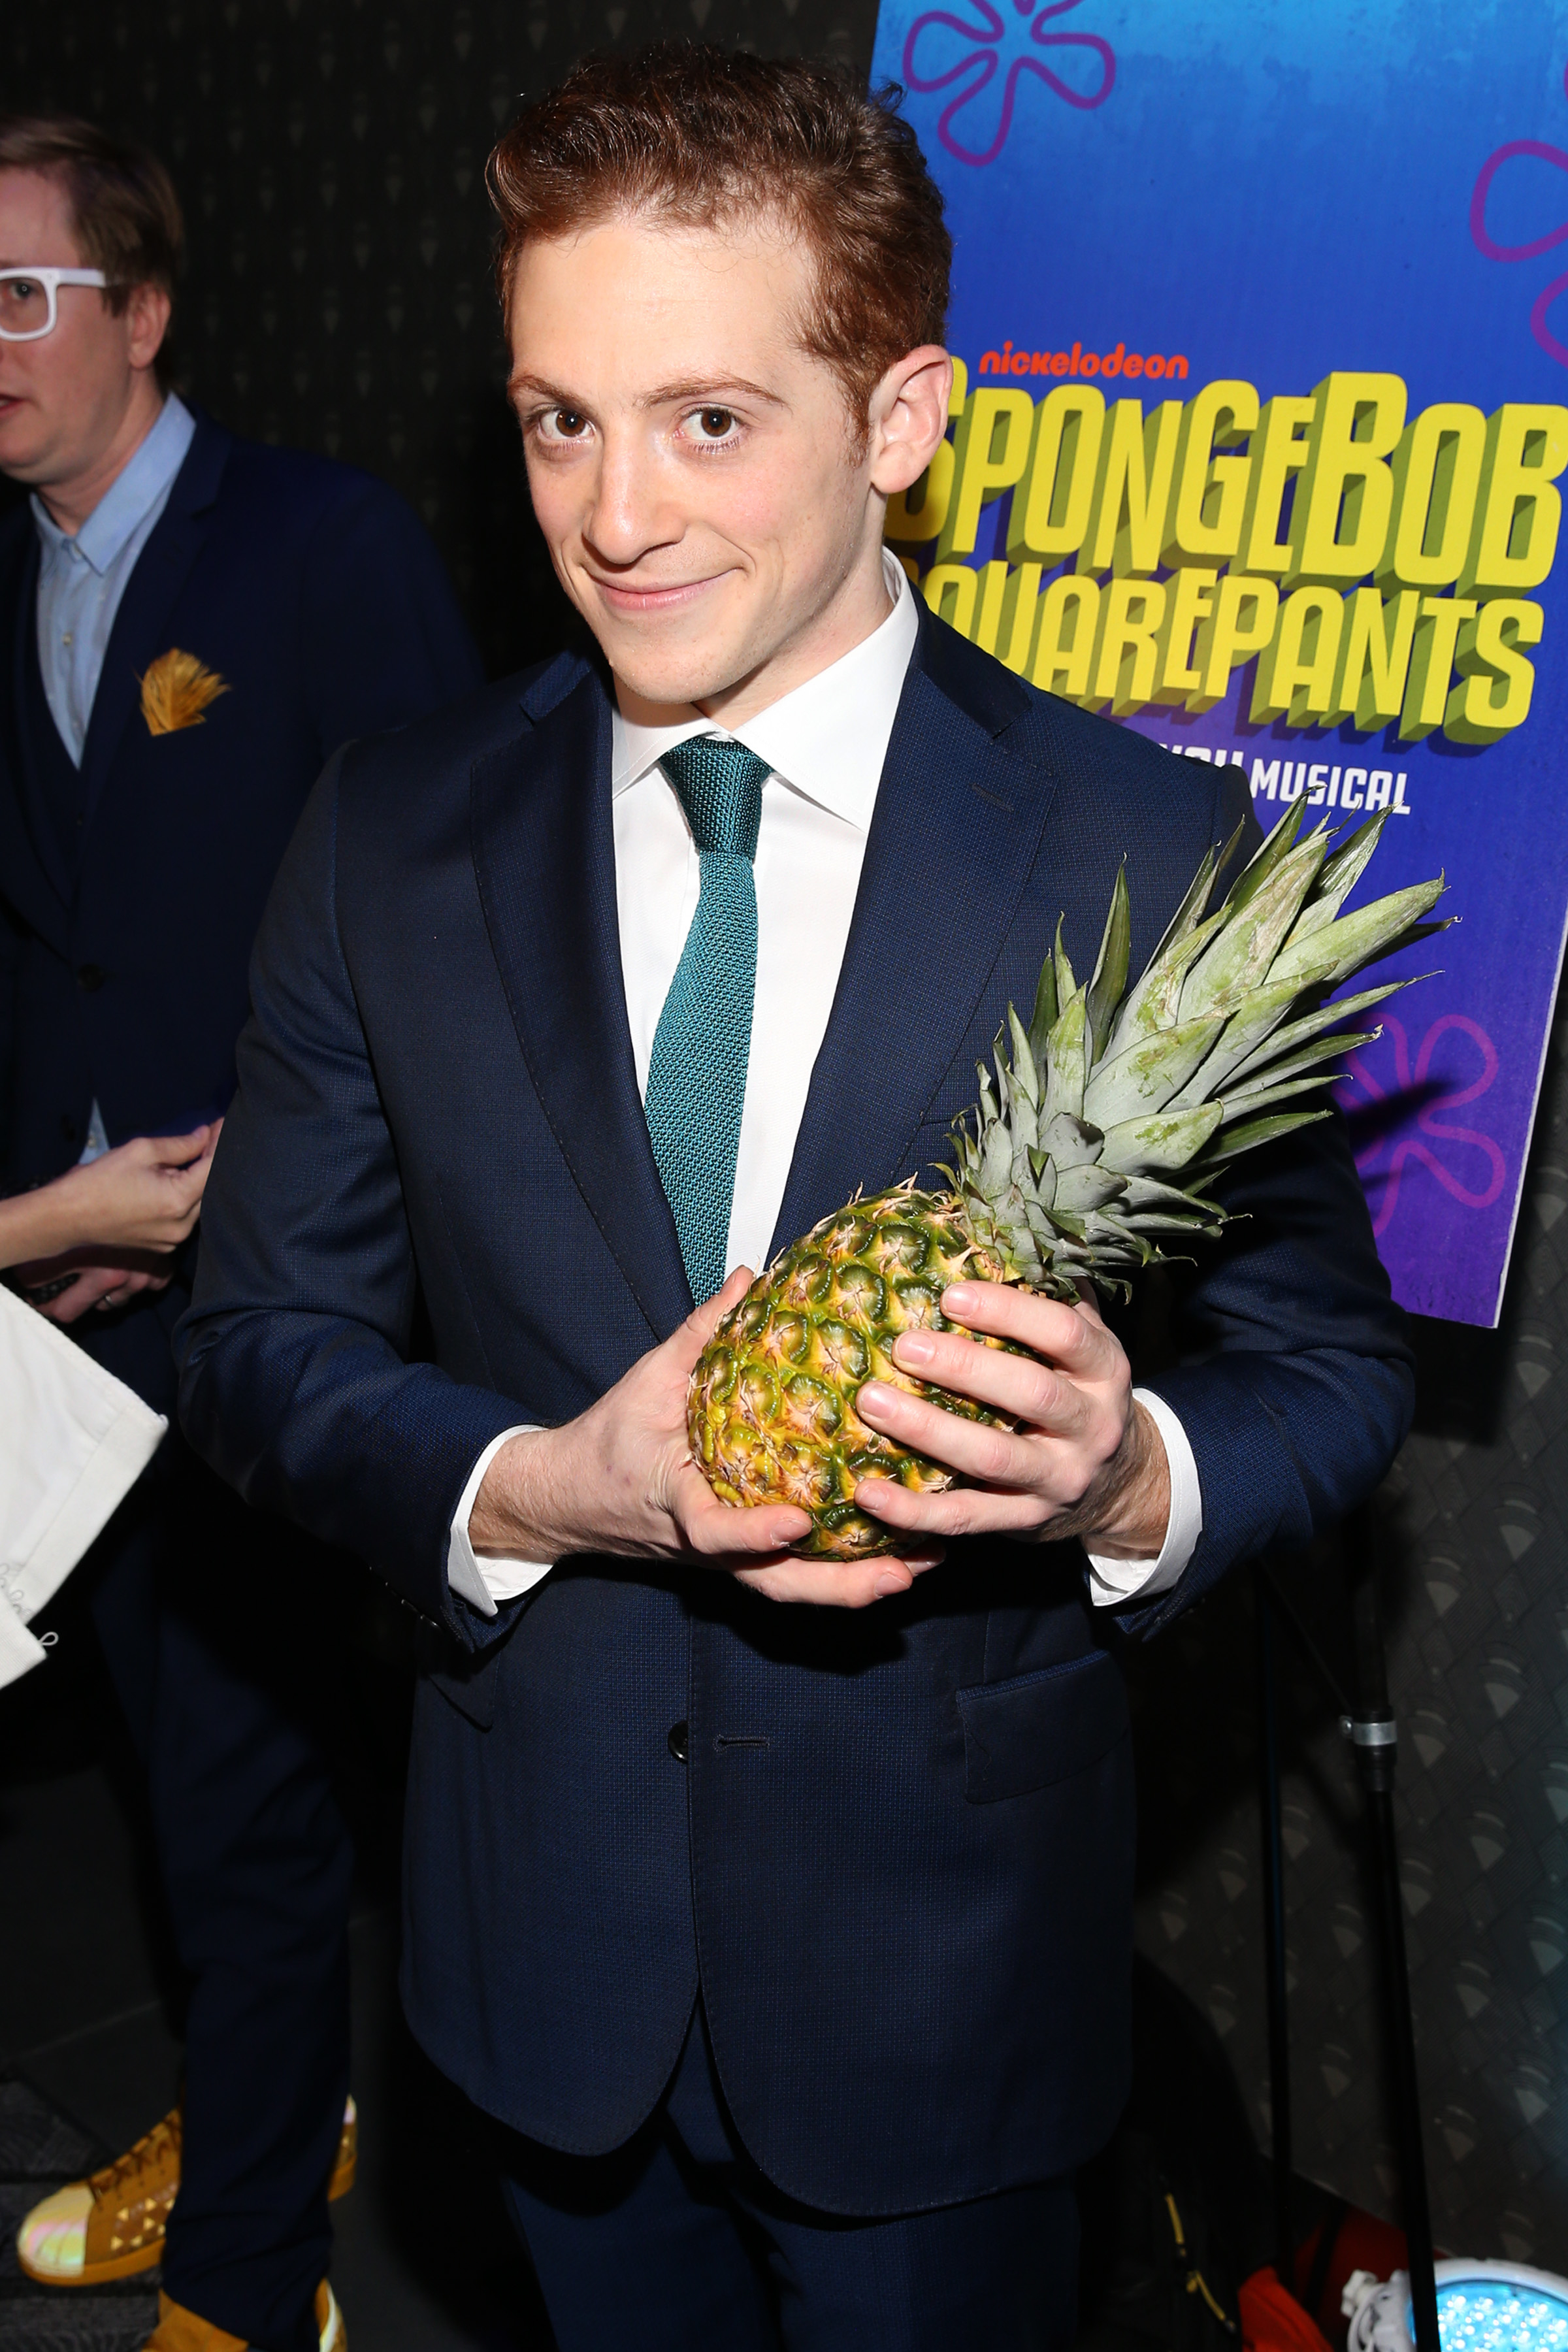 Ethan in a suit and holding a pineapple